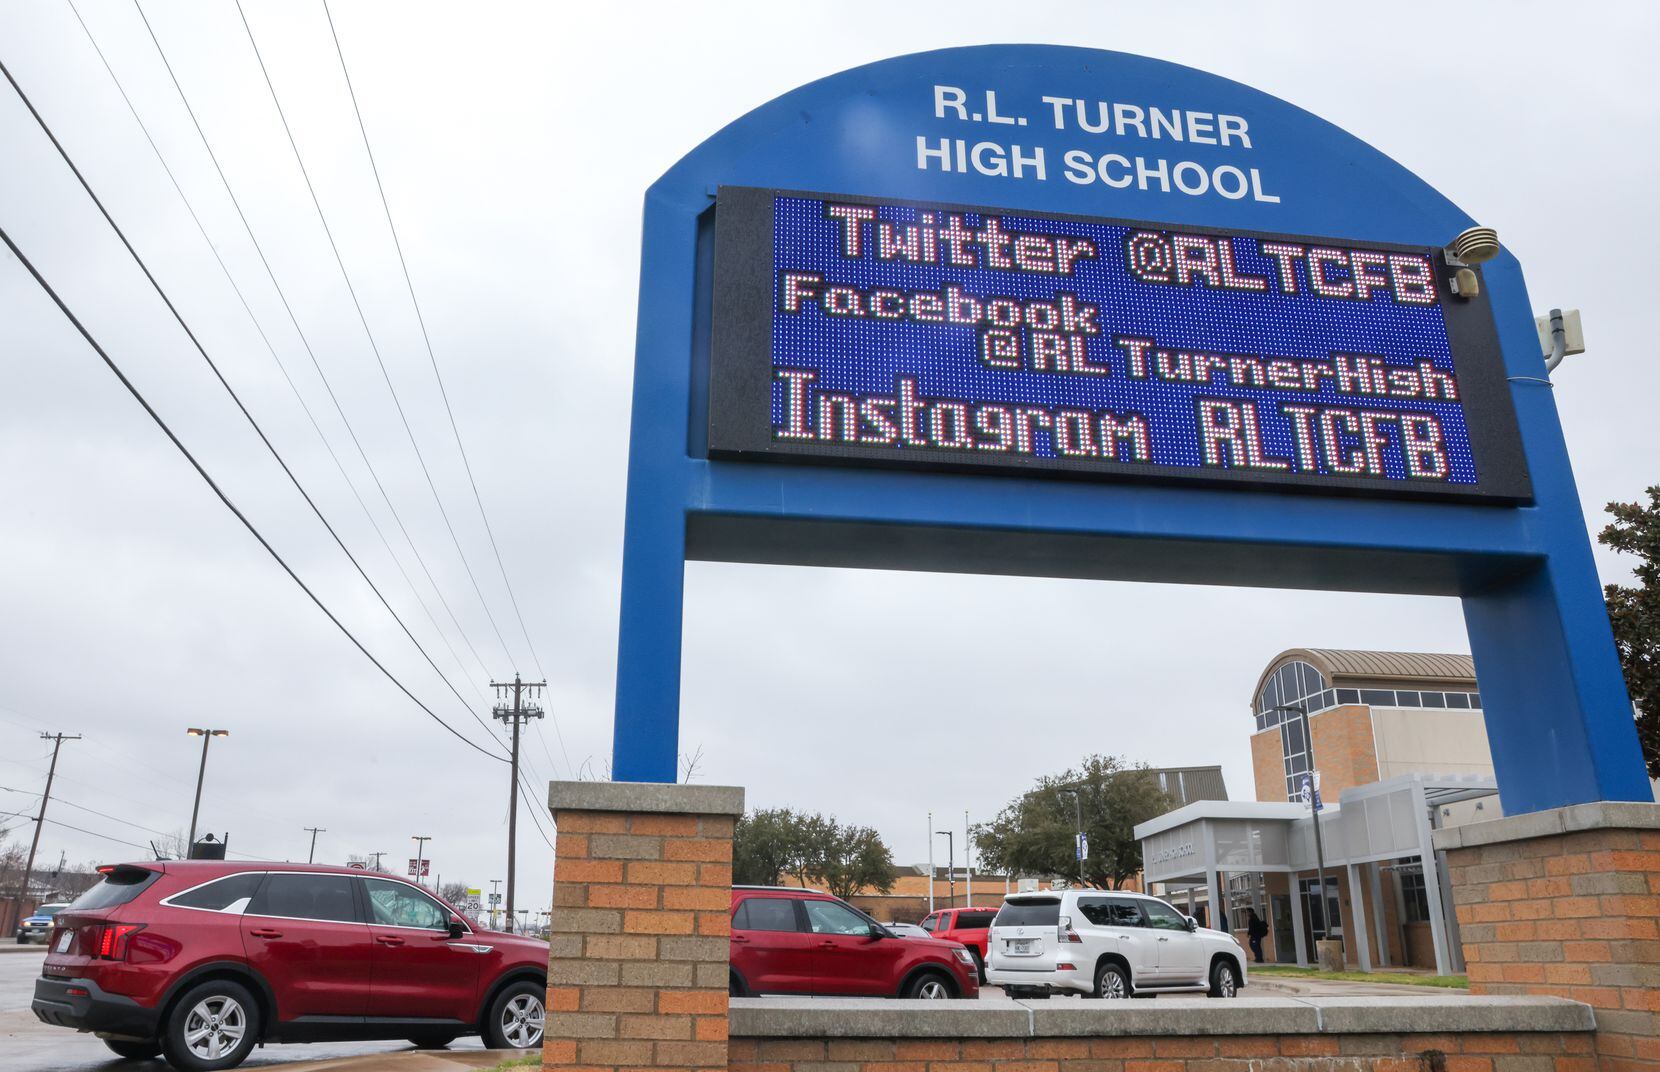 Cars waited outside of Carrollton-Farmers Branch ISD’s R. L. Turner High School for...